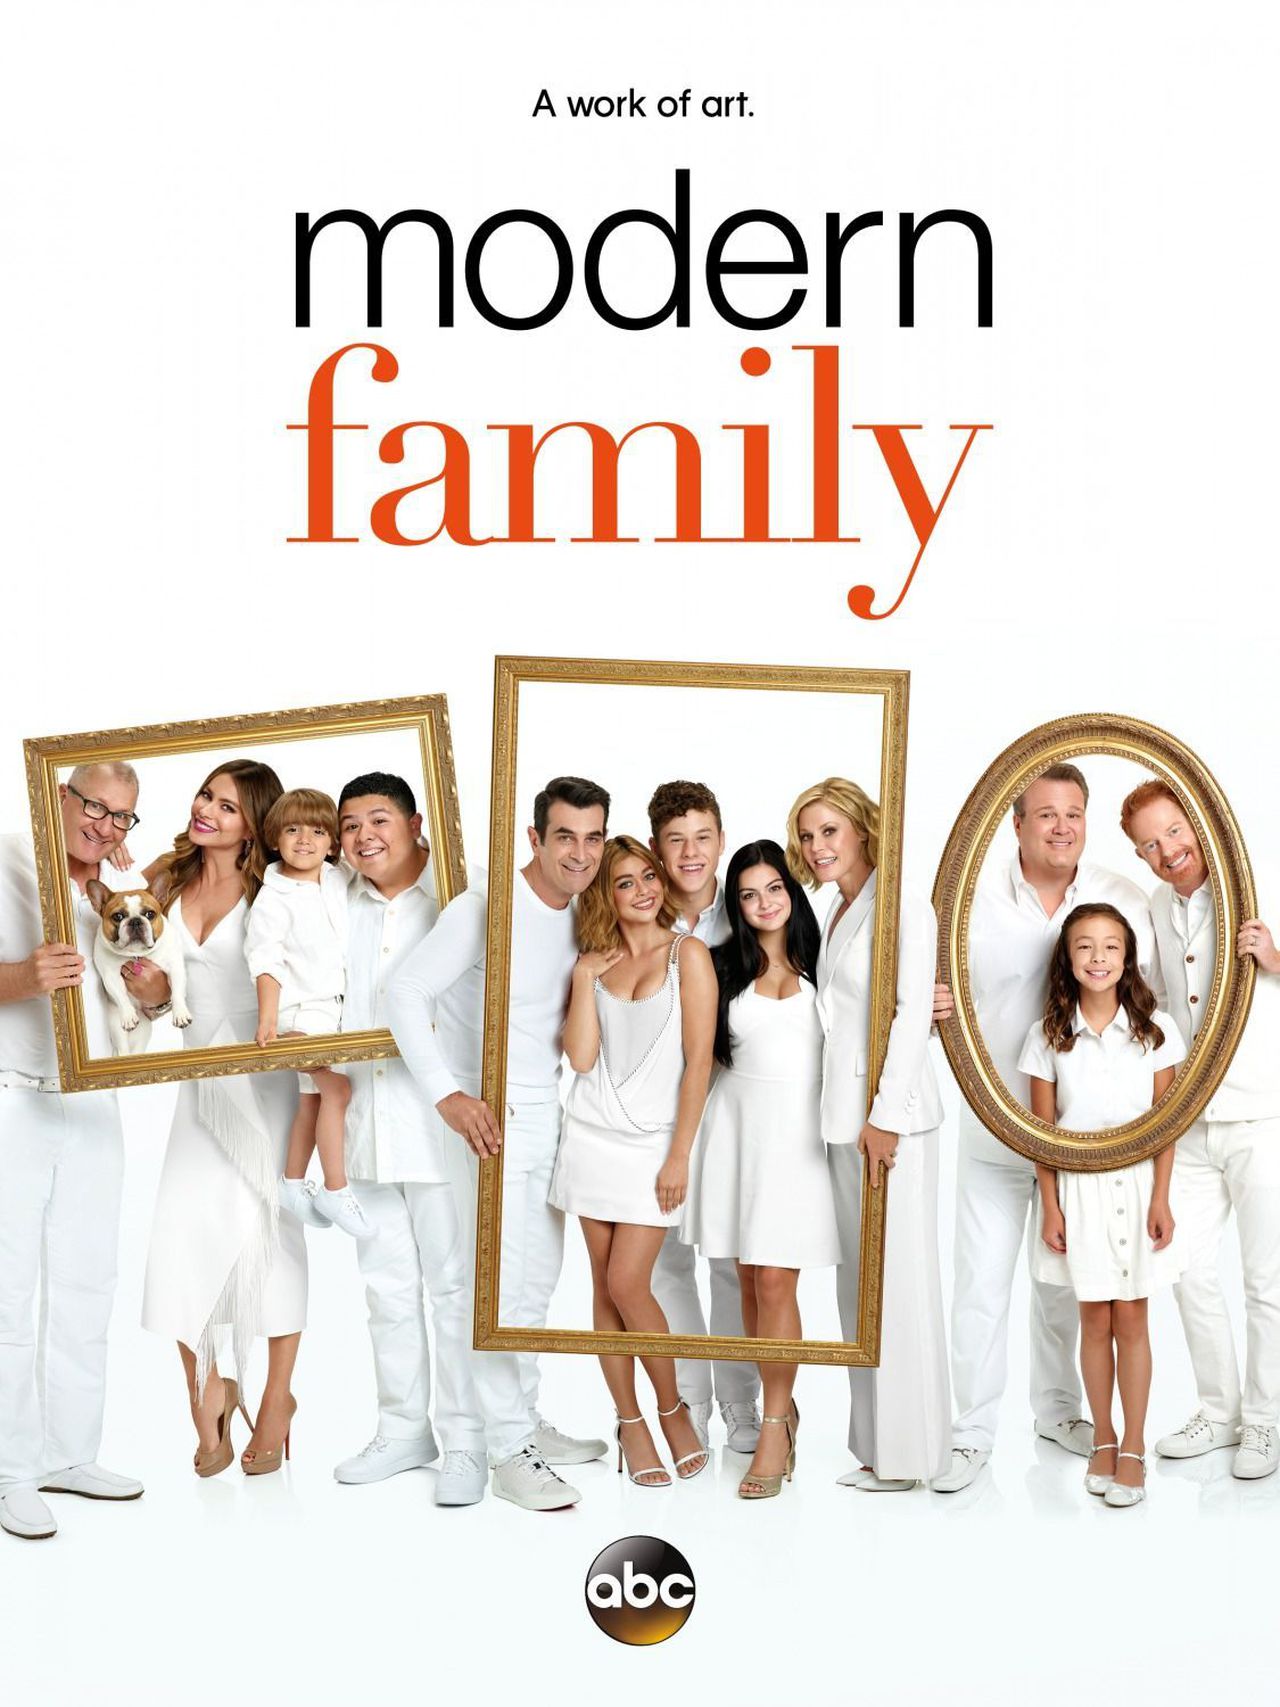 TV show Modern Family comes to an end after 11 years